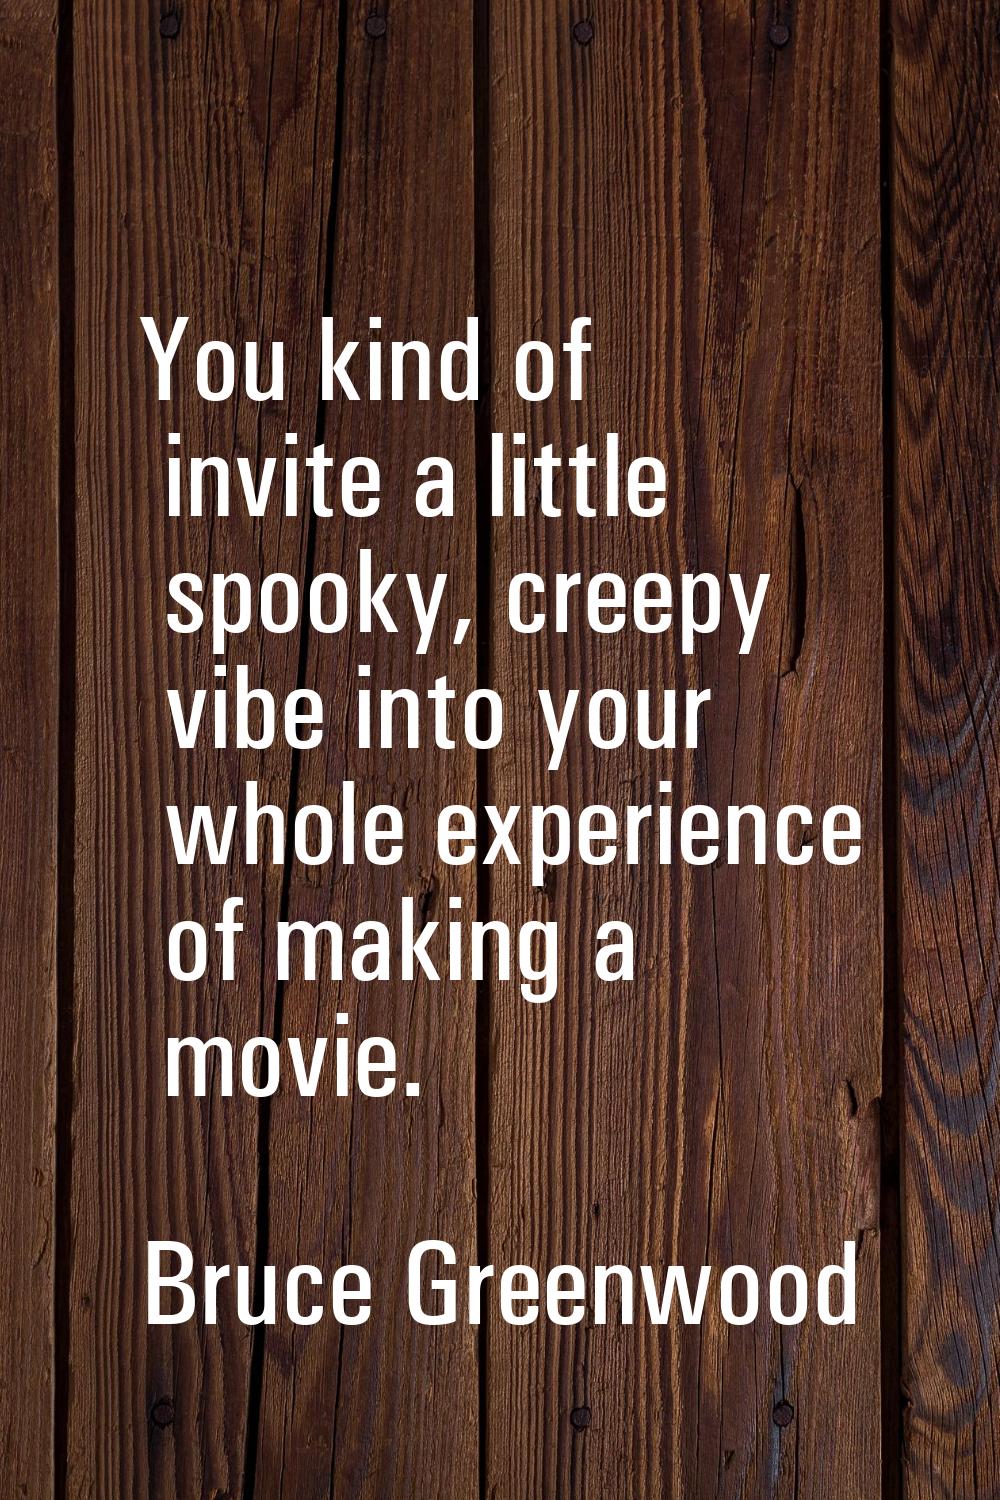 You kind of invite a little spooky, creepy vibe into your whole experience of making a movie.